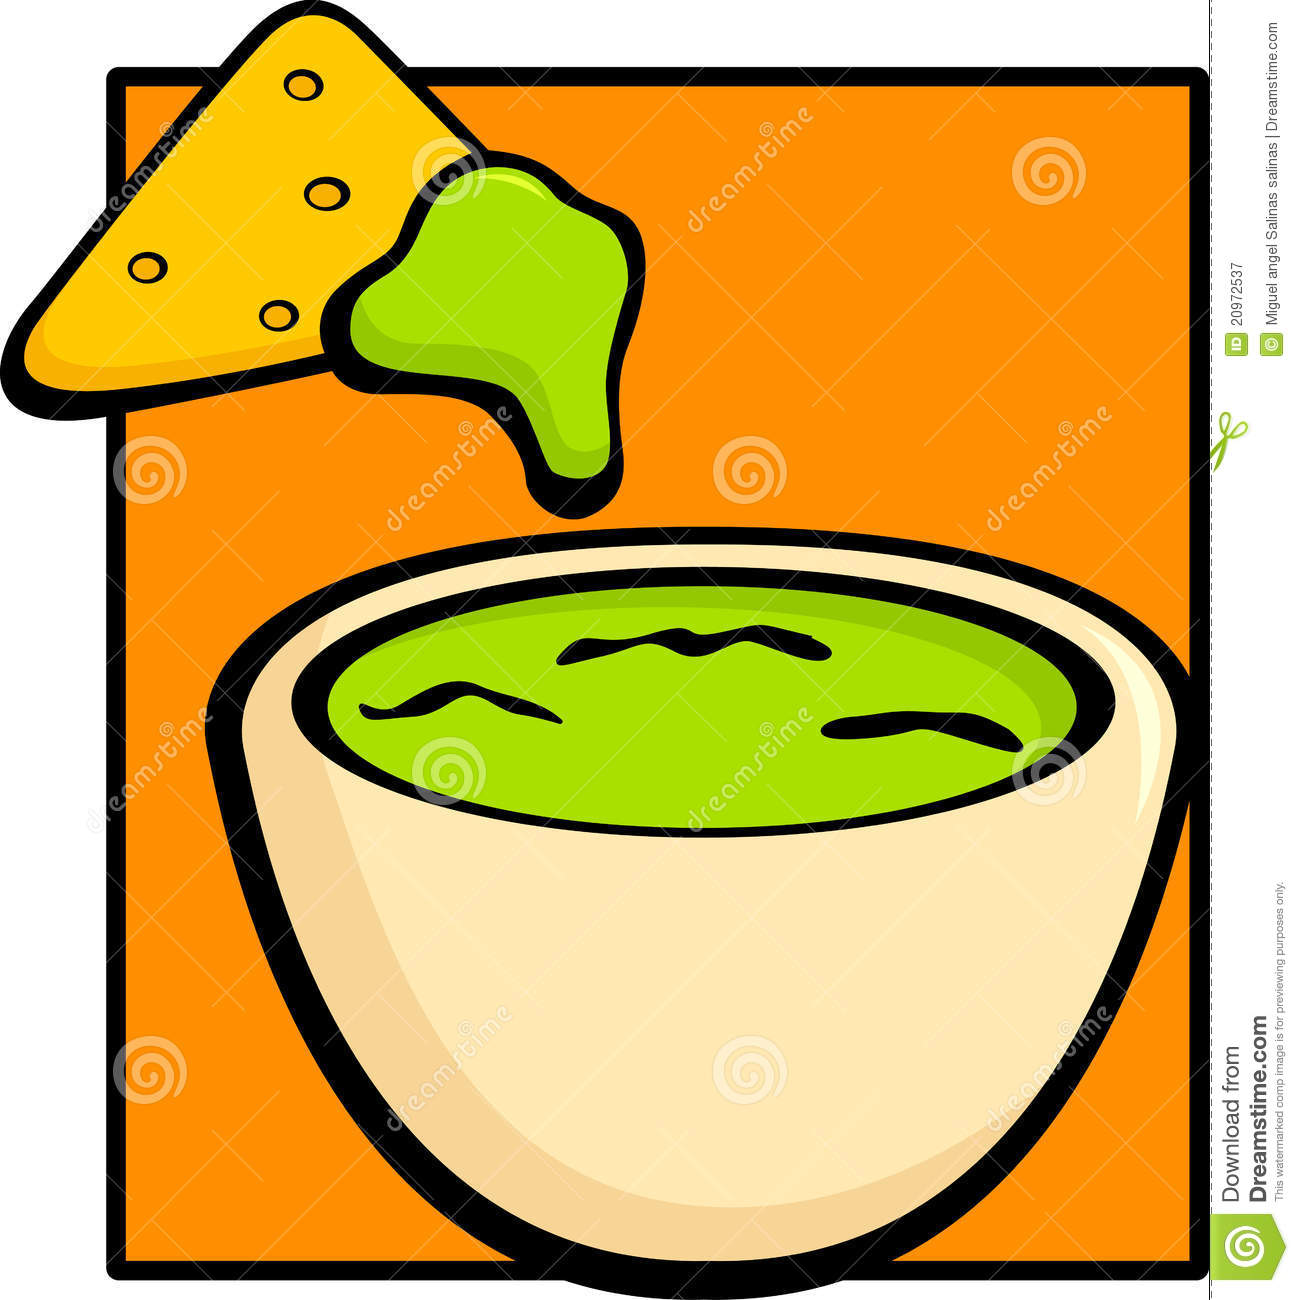 Guacamole And Tortilla Chip Royalty Free Stock Photography   Image